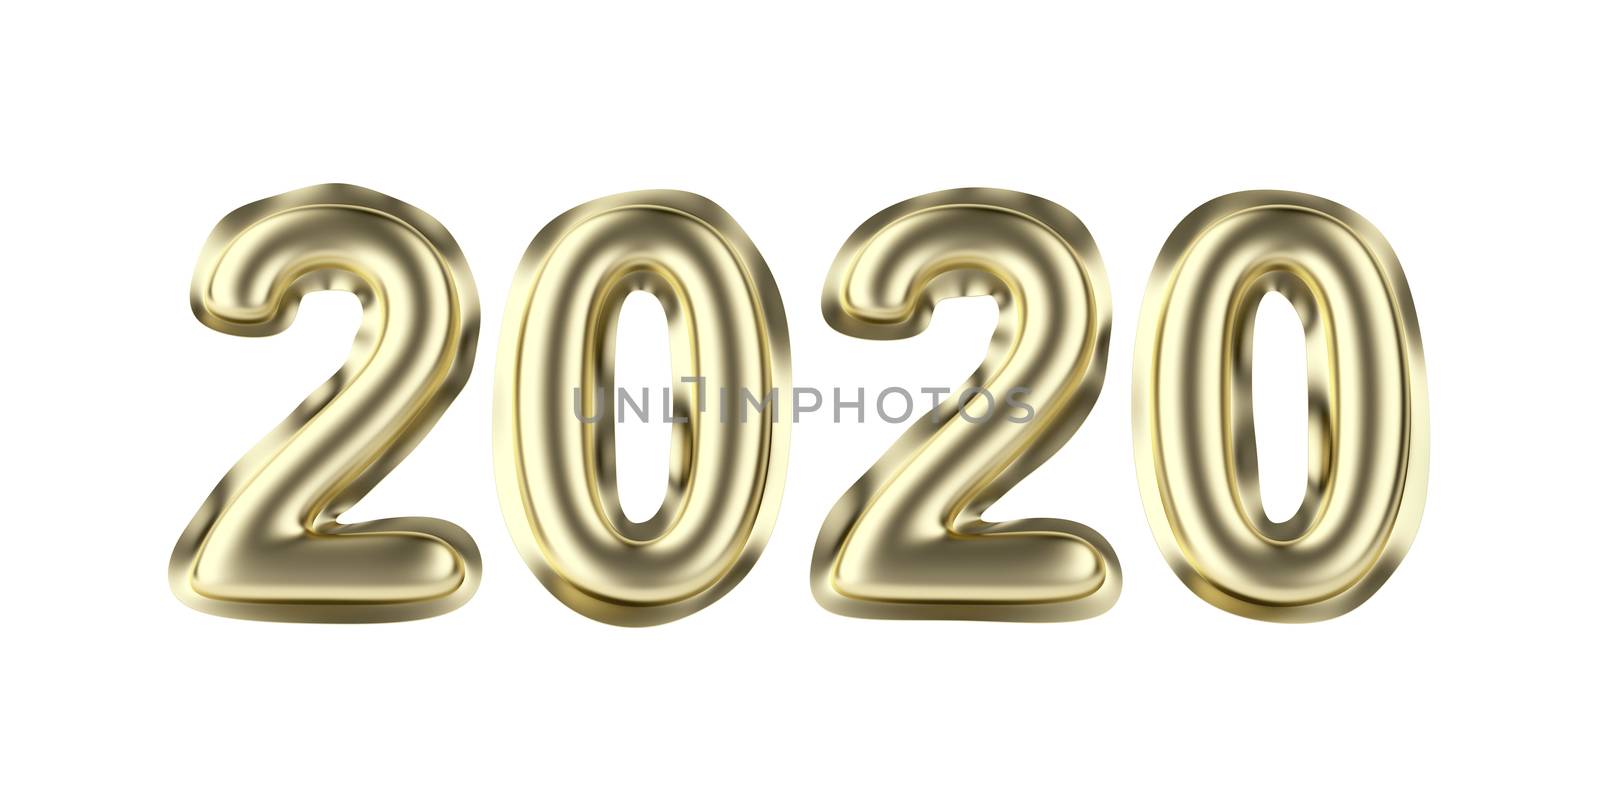 Happy new year 2020. Concept image with golden balloons, front view.